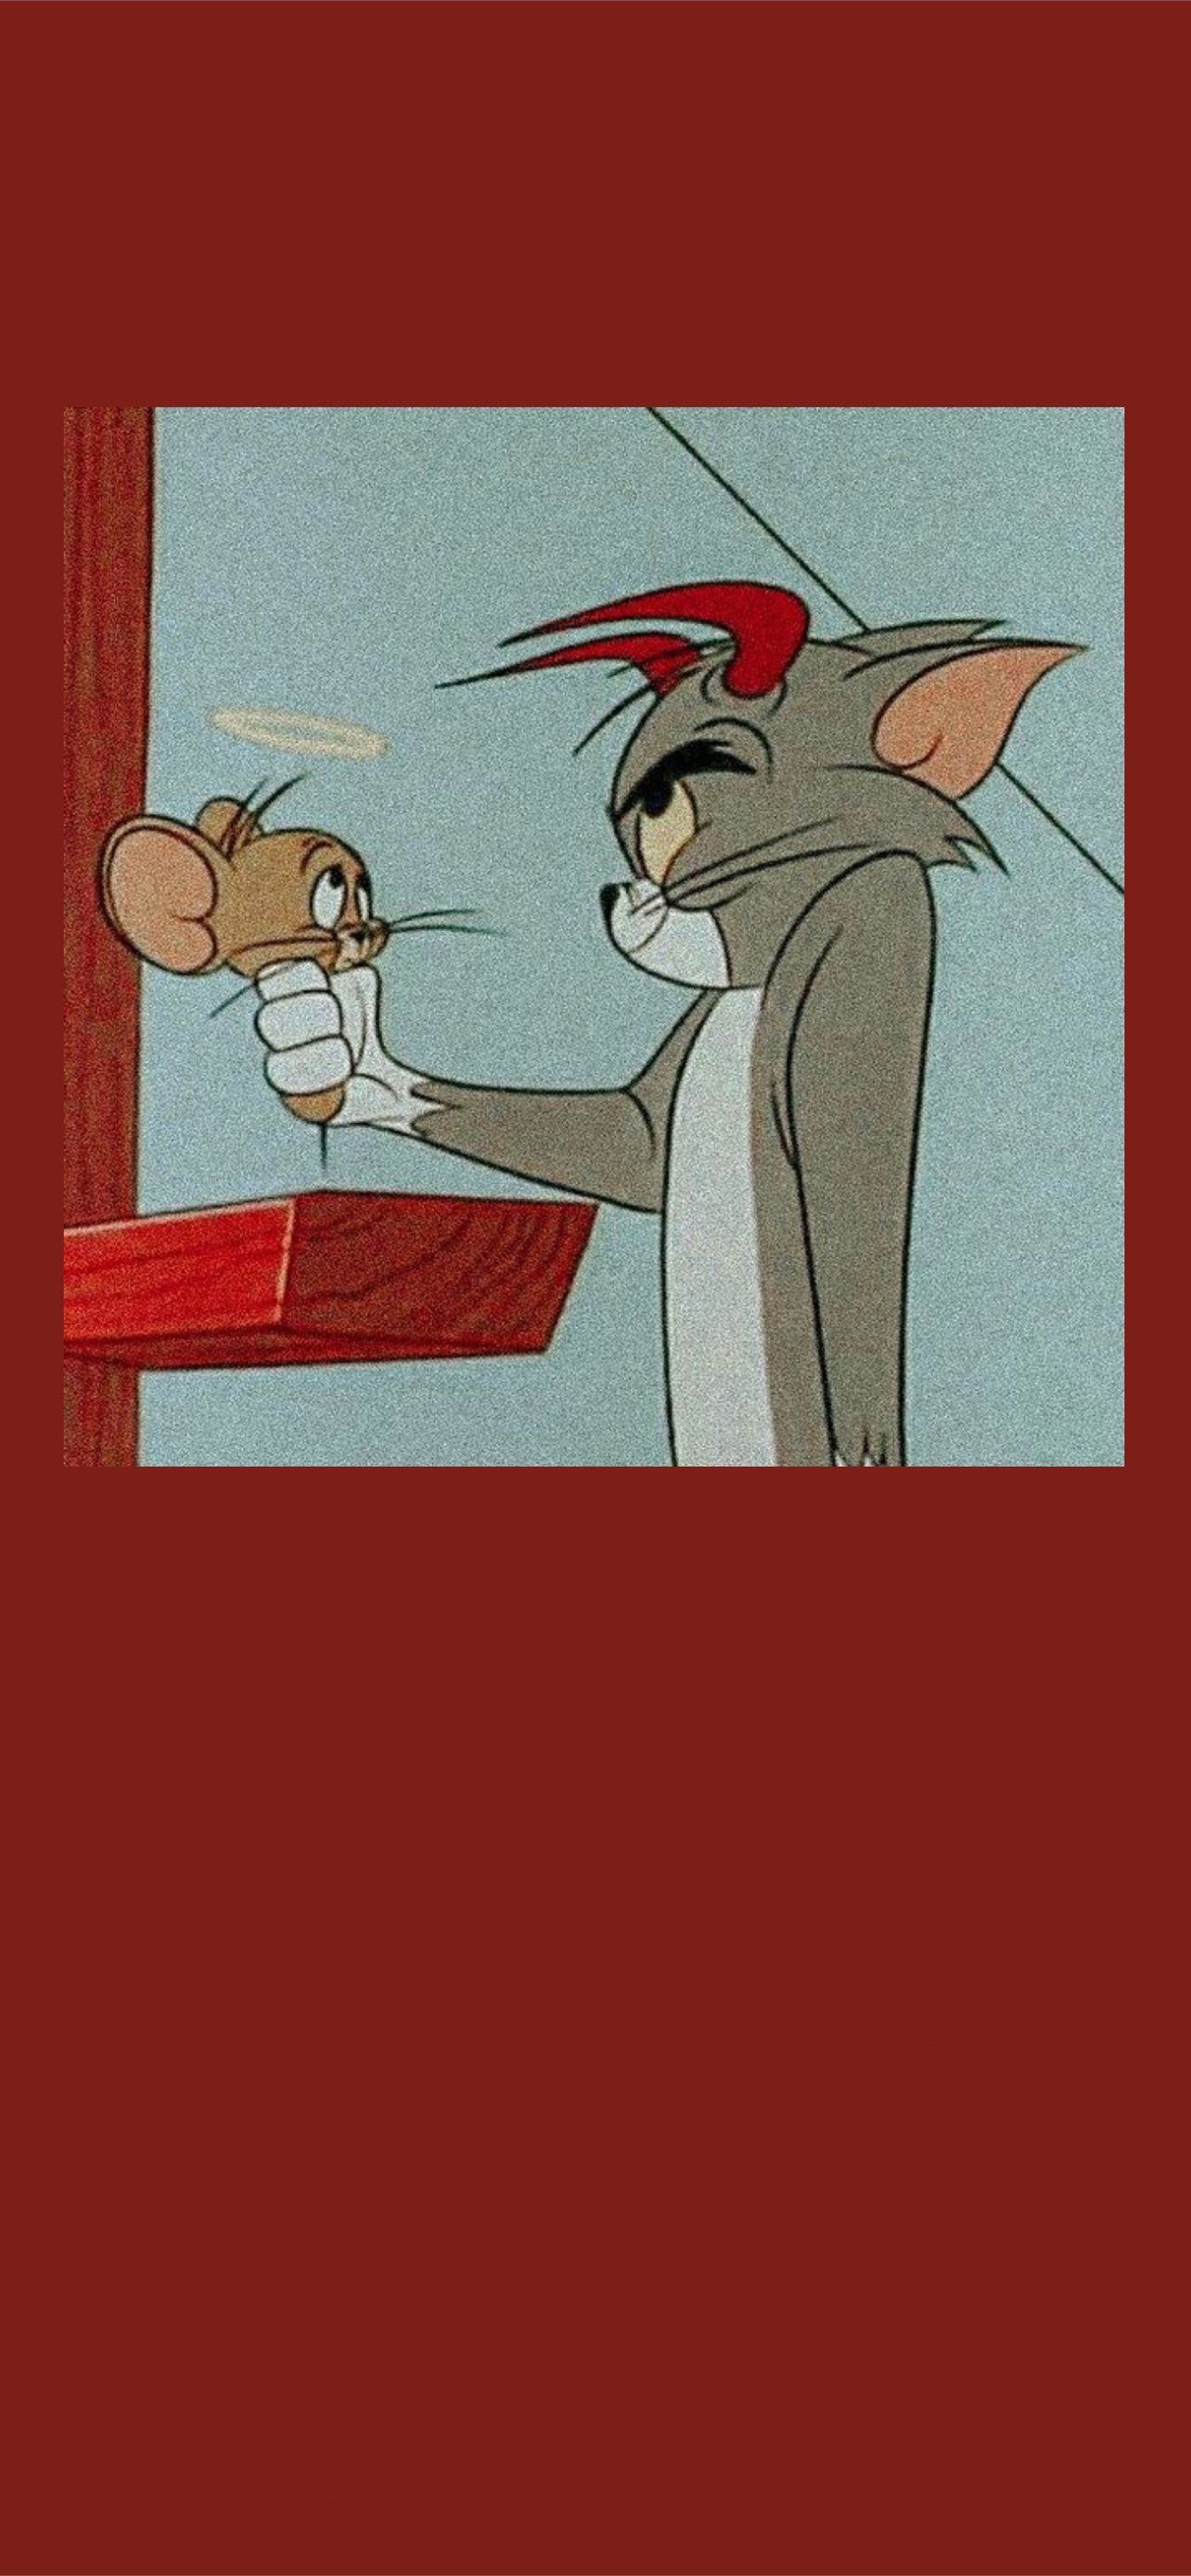 Tom Jerry in 2021 iPhone Wallpapers Free Download